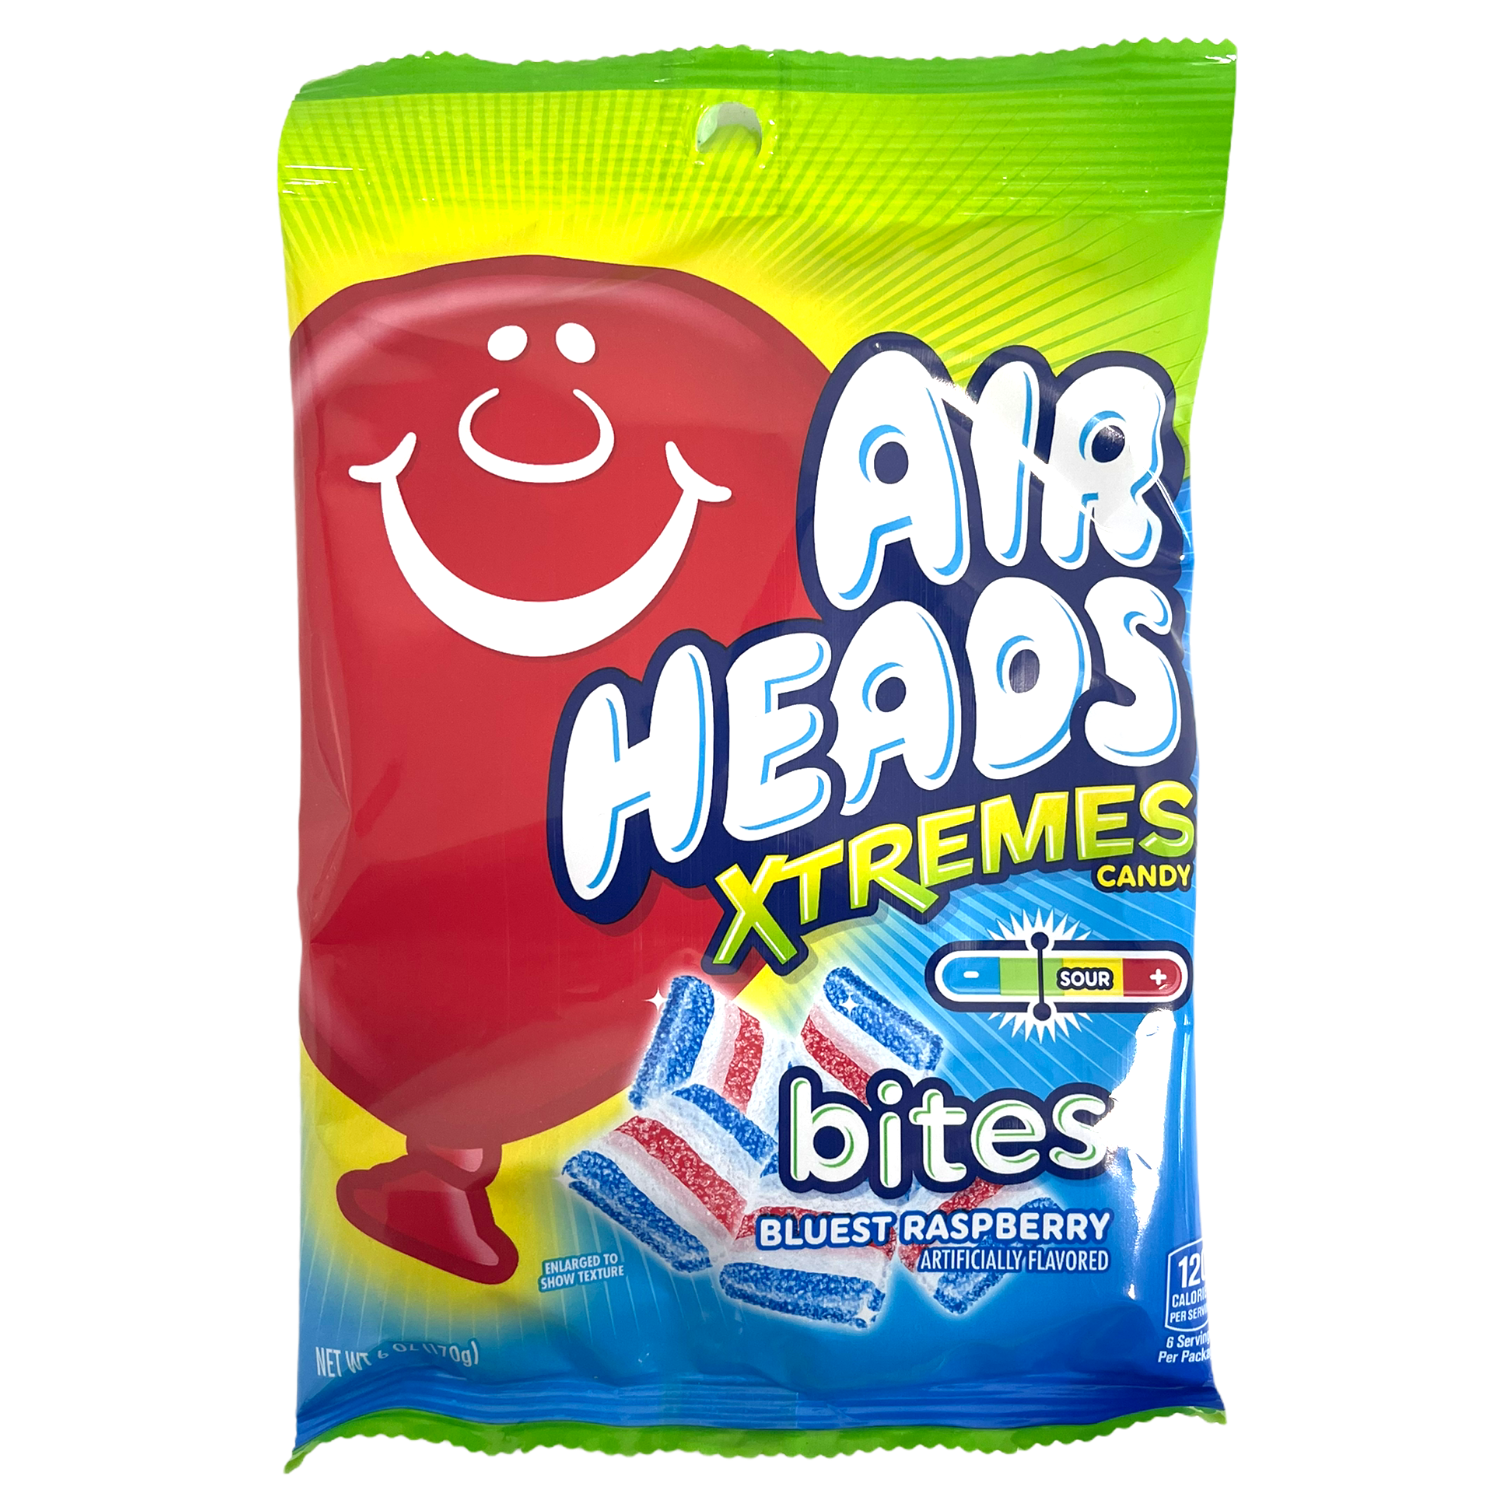 Airheads Xtremes Bites Bluest Raspberry Candy 170g sold by American Grocer in the UK